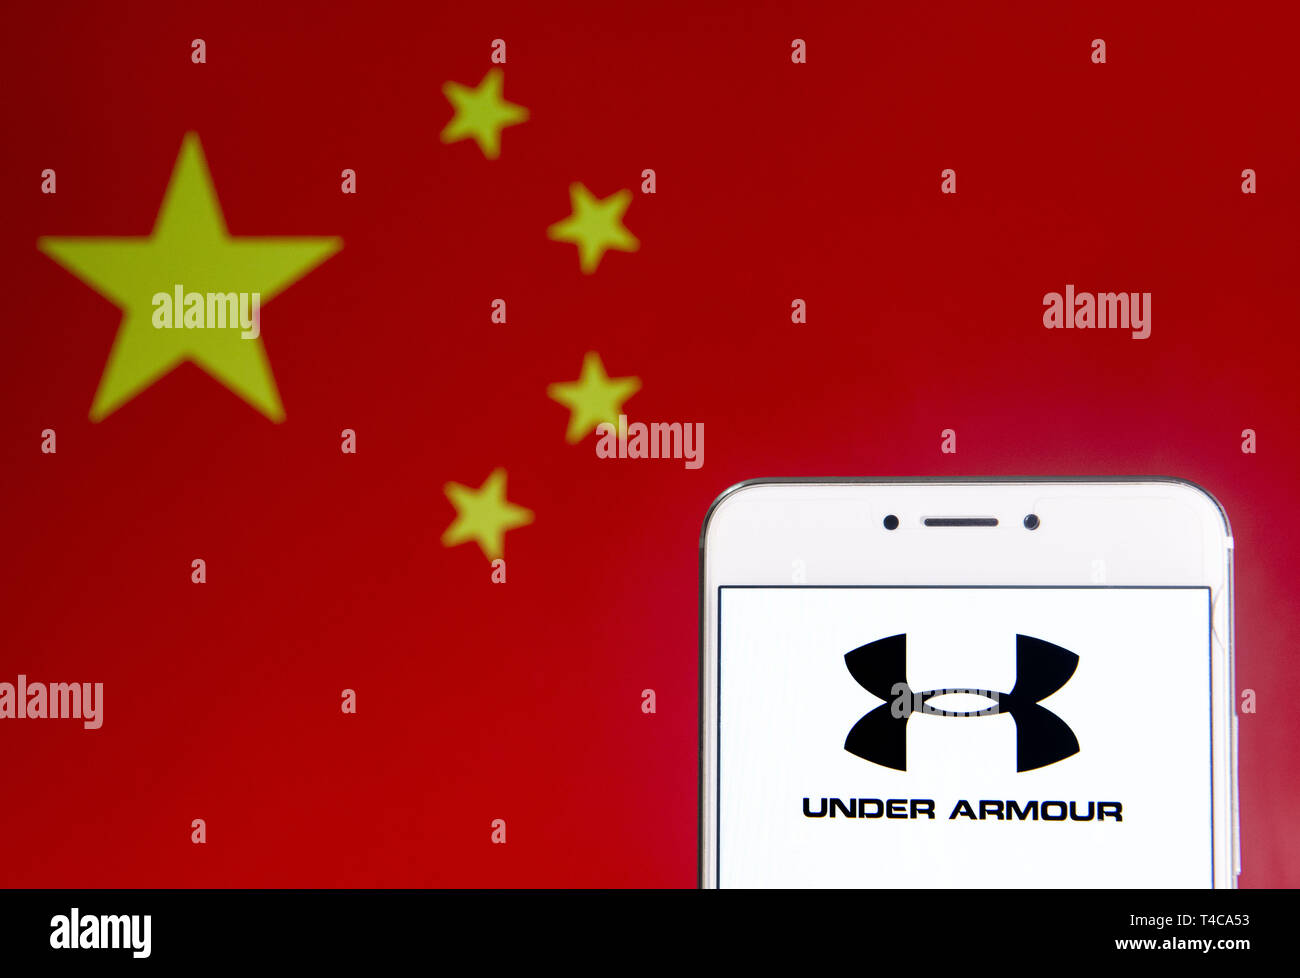 Hong Kong. 6th Apr, 2019. In this photo a American clothing brand Under Armour logo is seen an Android mobile device People's Republic of China flag in the